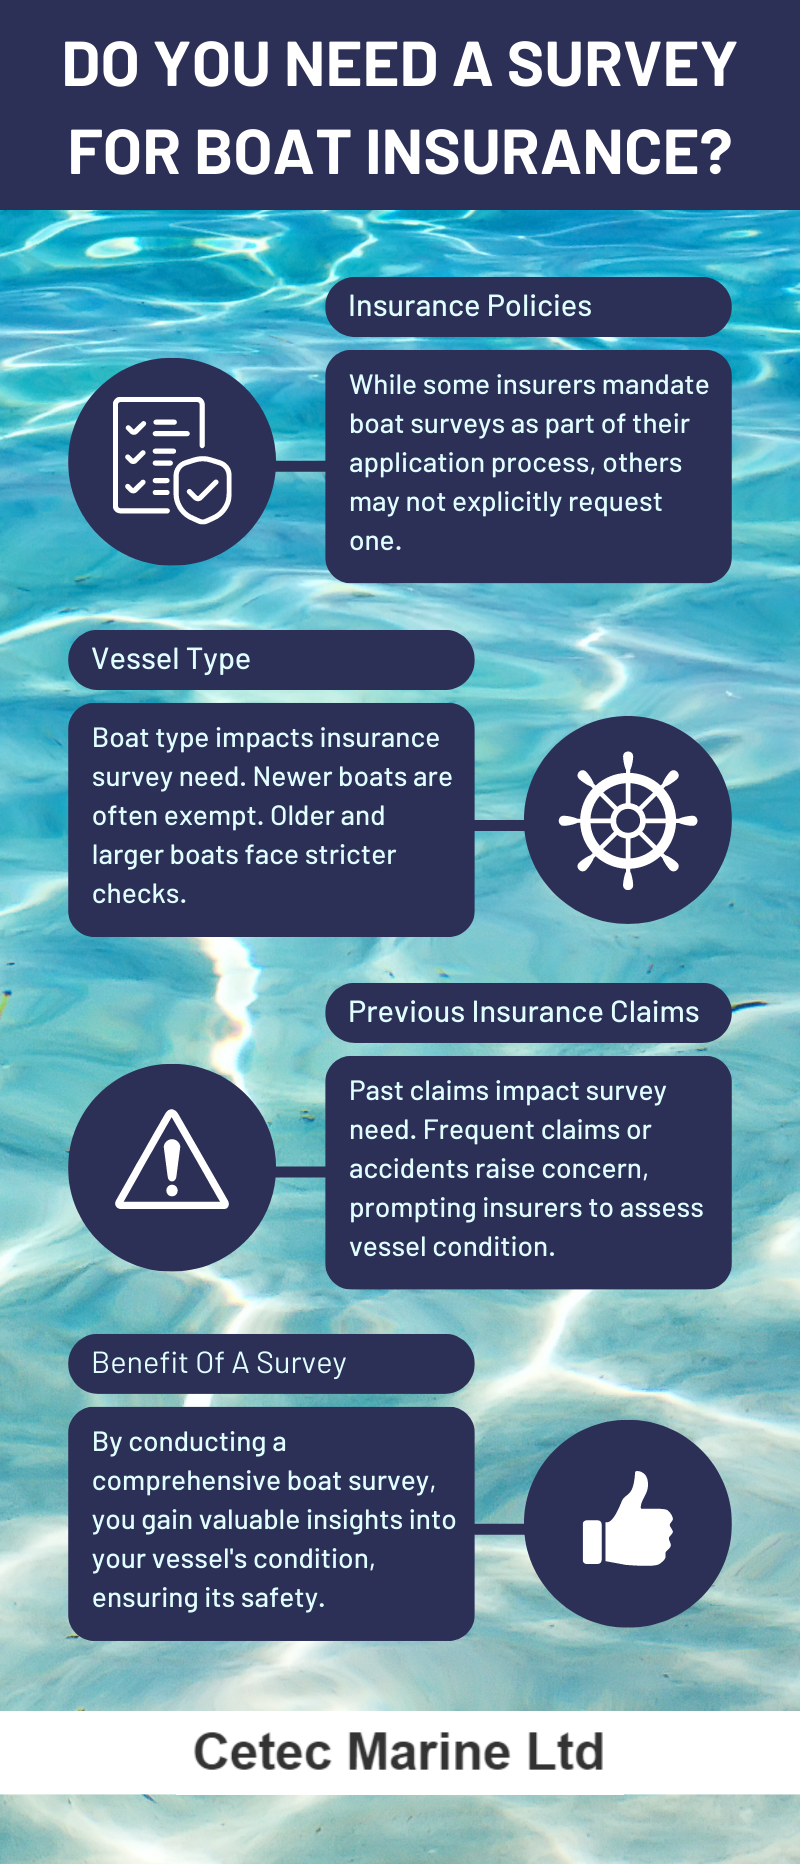 Do You Need A Survey For Boat Insurance?